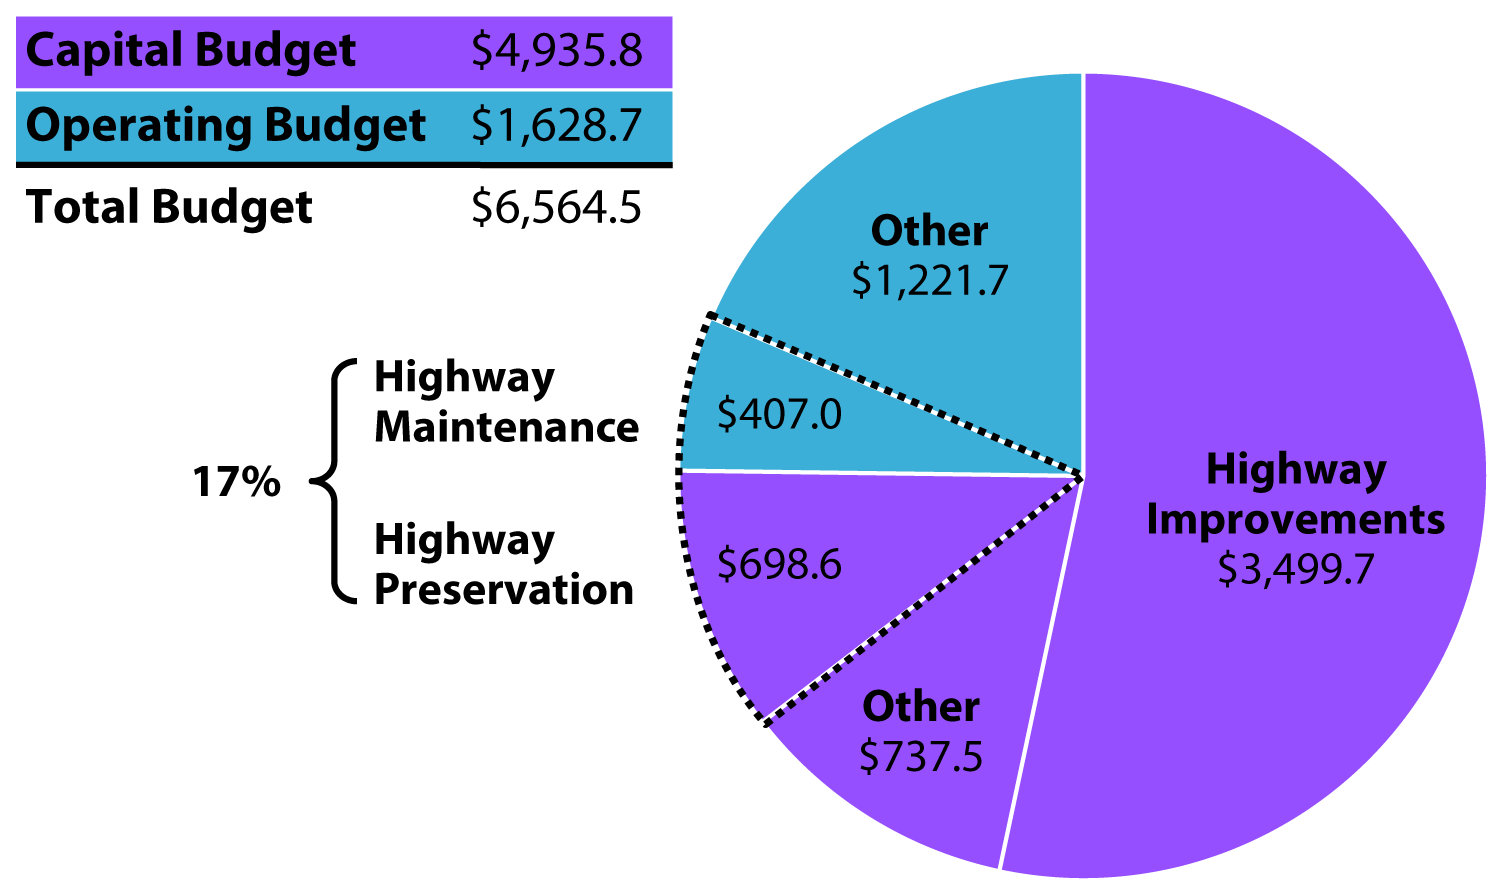 Highway Maintenance: $407.0 million from Operating Budget totaling $1626.9 M, Highway Preservation: $698.6 million from Capital Budget totaling $4935.8 M